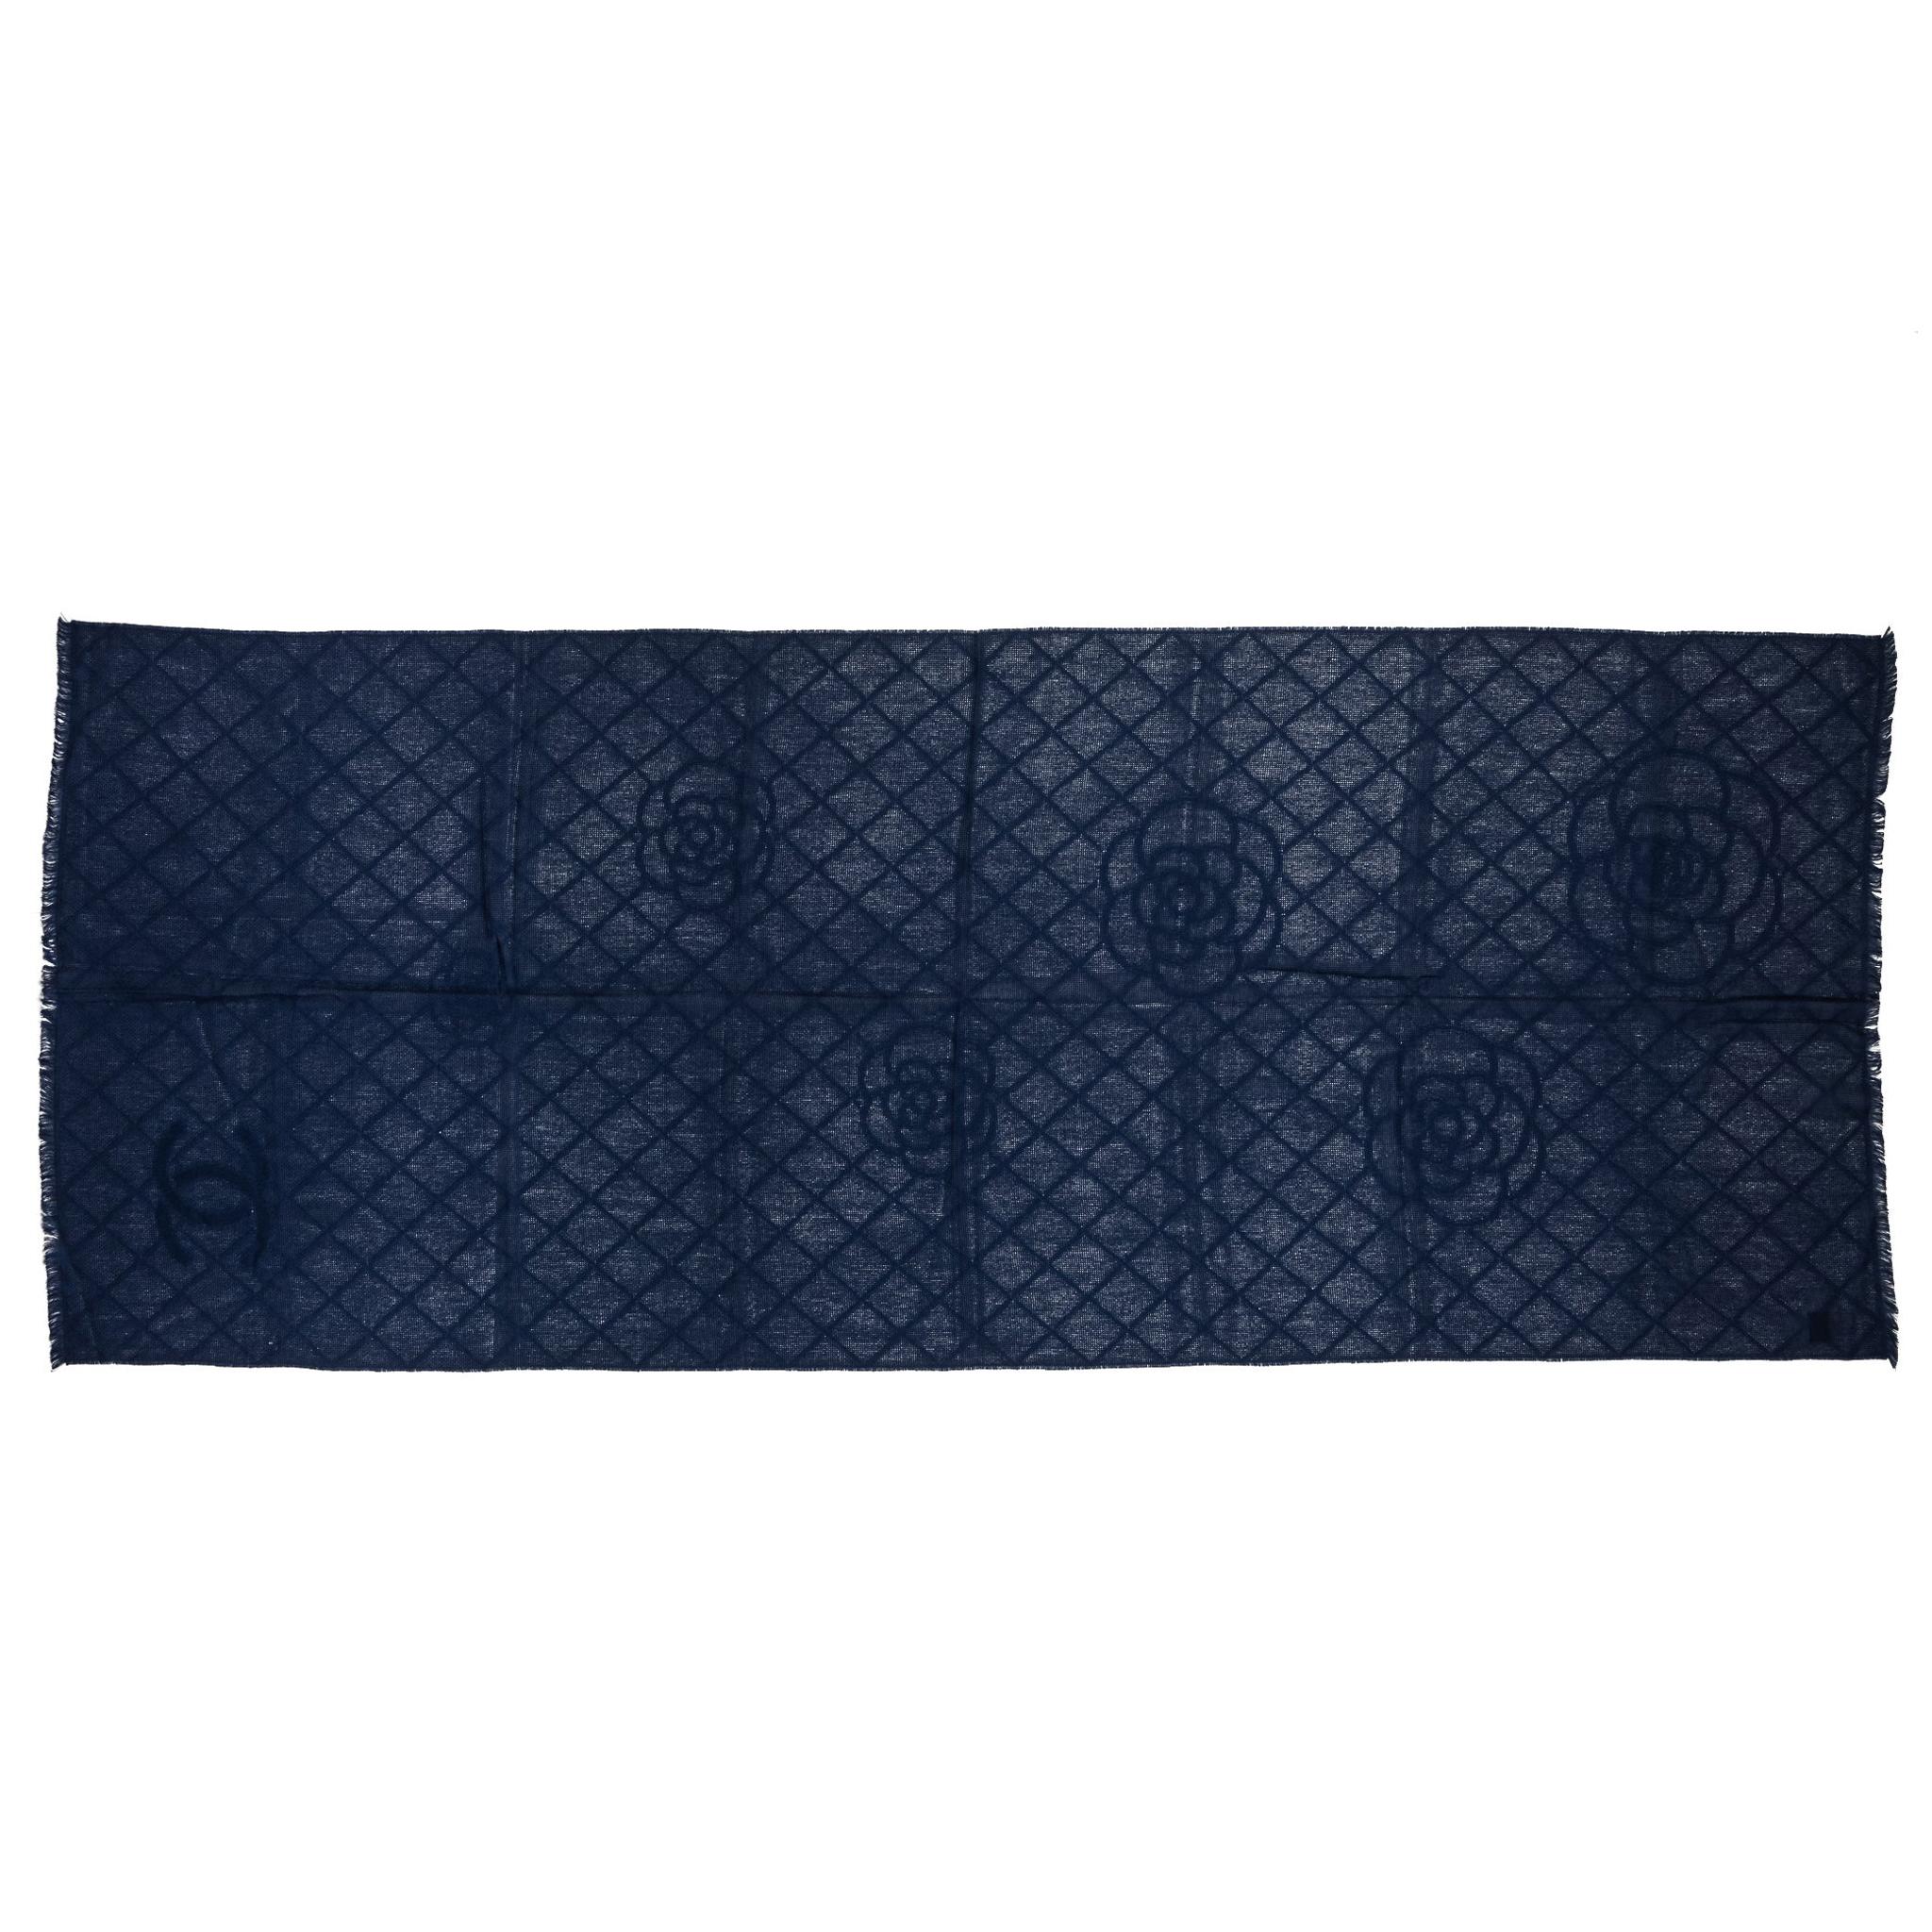 New Chanel Navy Cashmere Camellia Flower Shawl